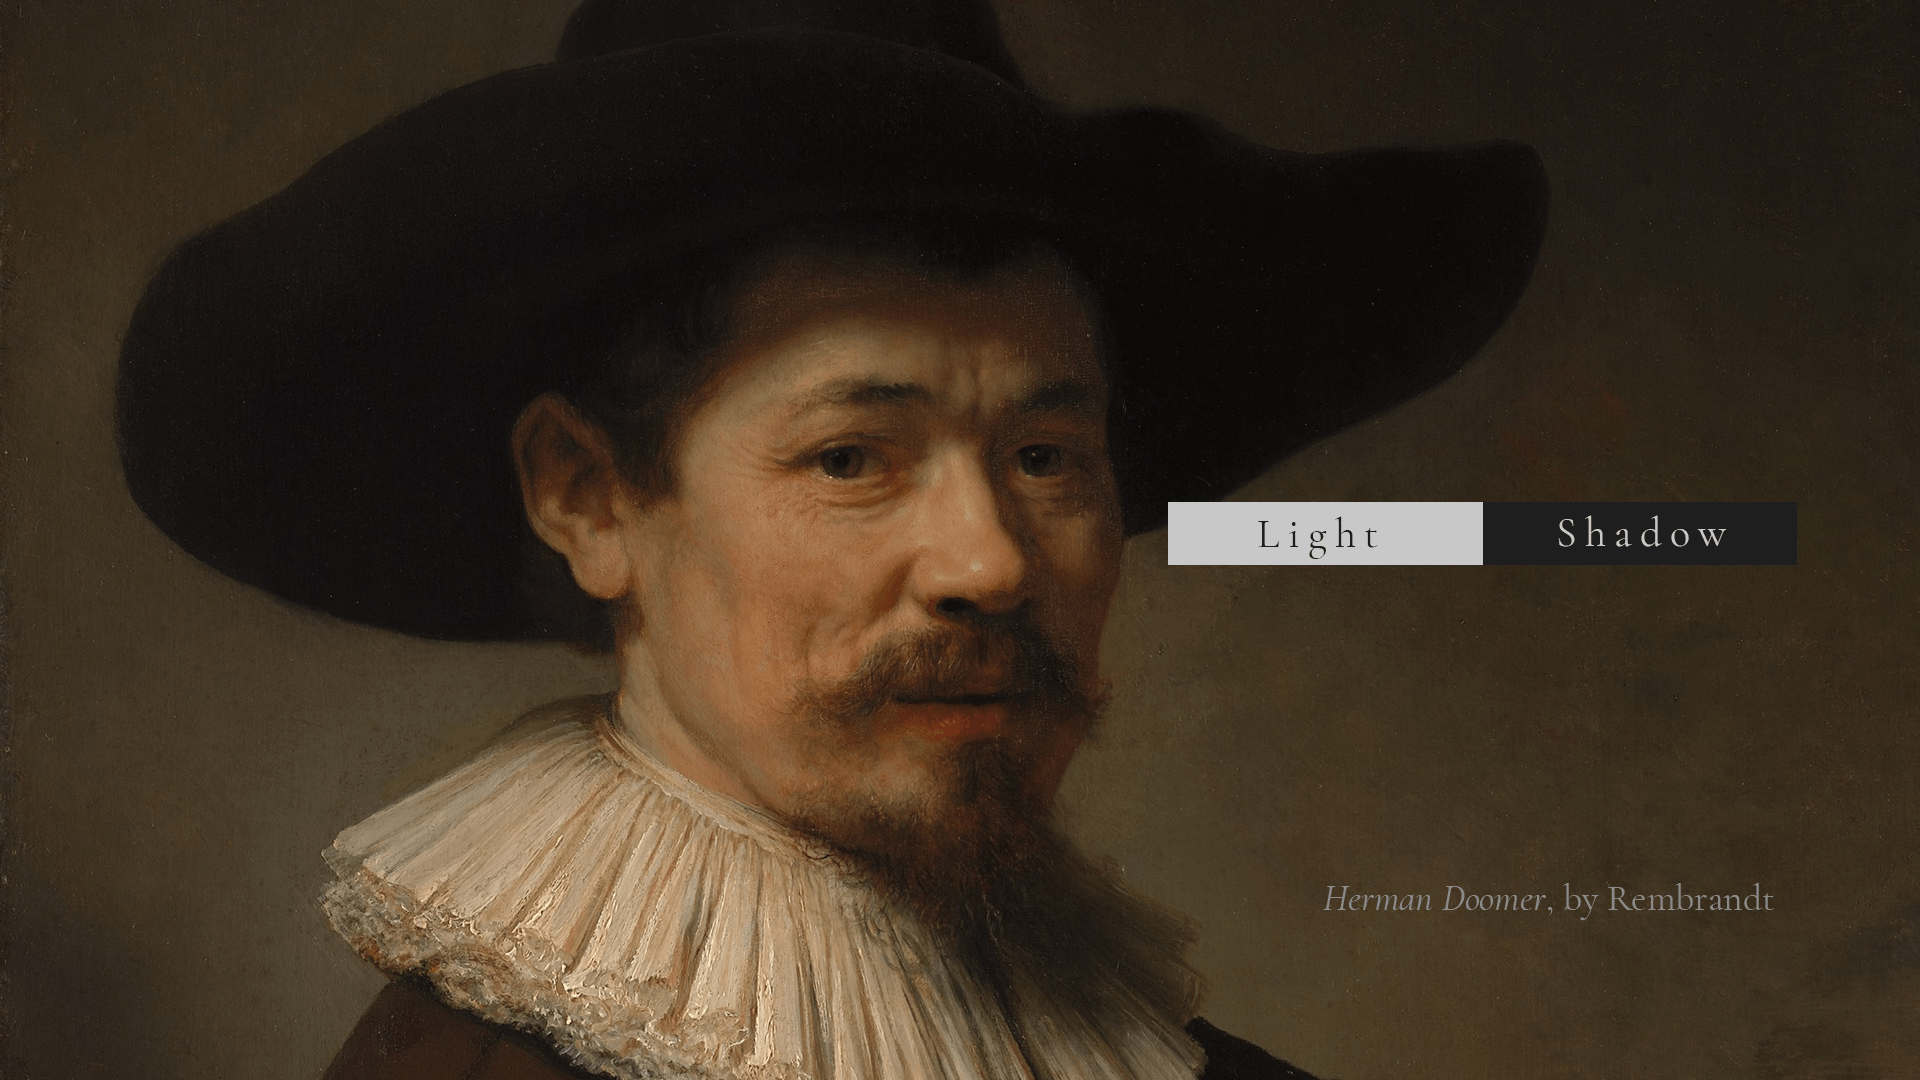 The light is warmer than the shadows in Rembrandt's Herman Doomer